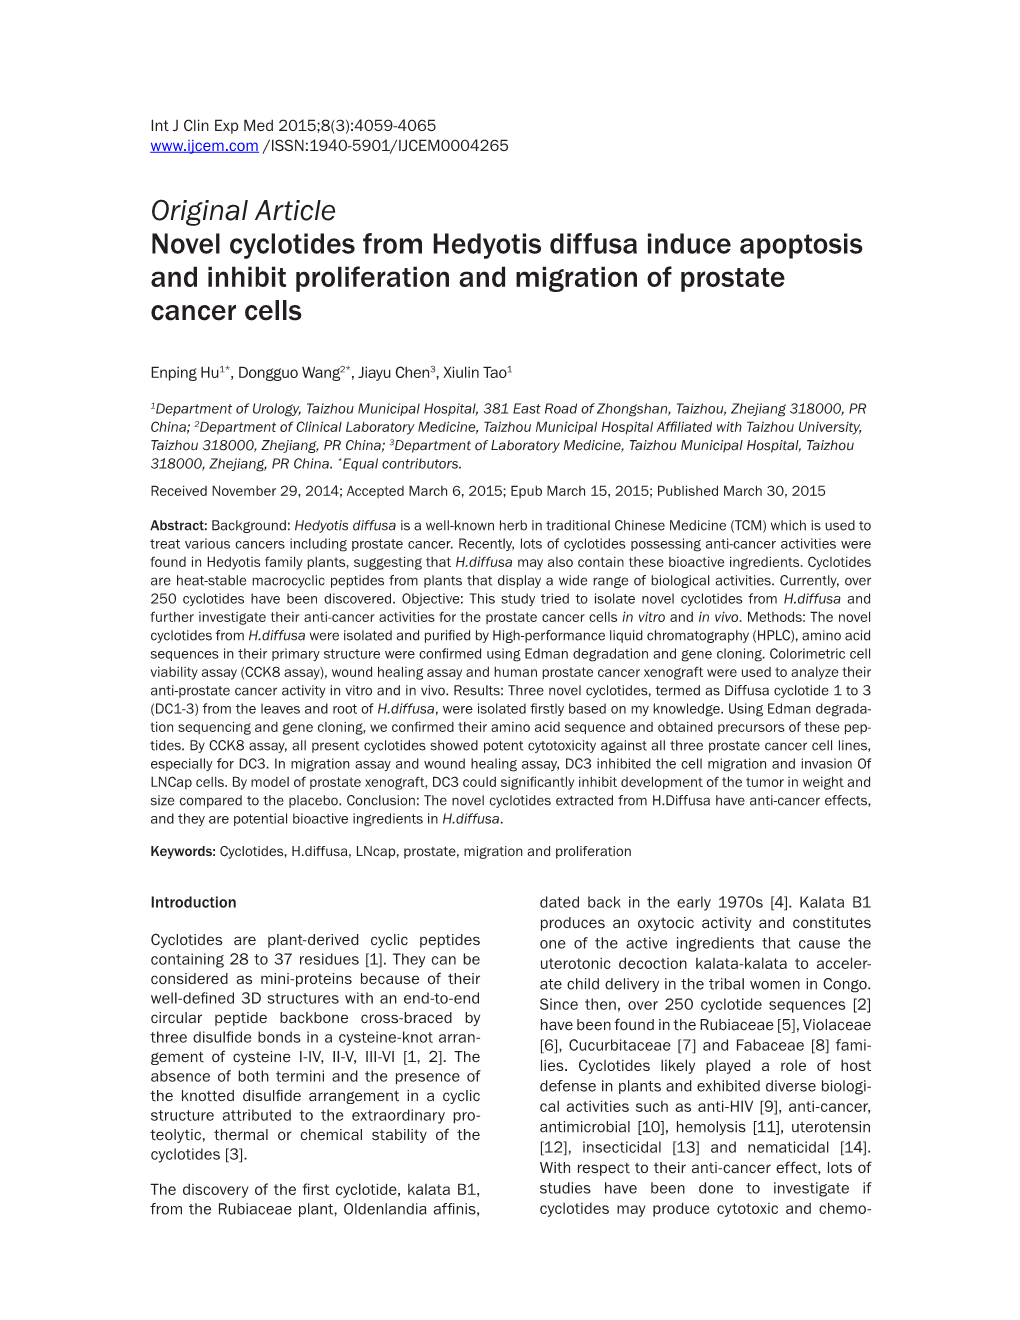 Original Article Novel Cyclotides from Hedyotis Diffusa Induce Apoptosis and Inhibit Proliferation and Migration of Prostate Cancer Cells